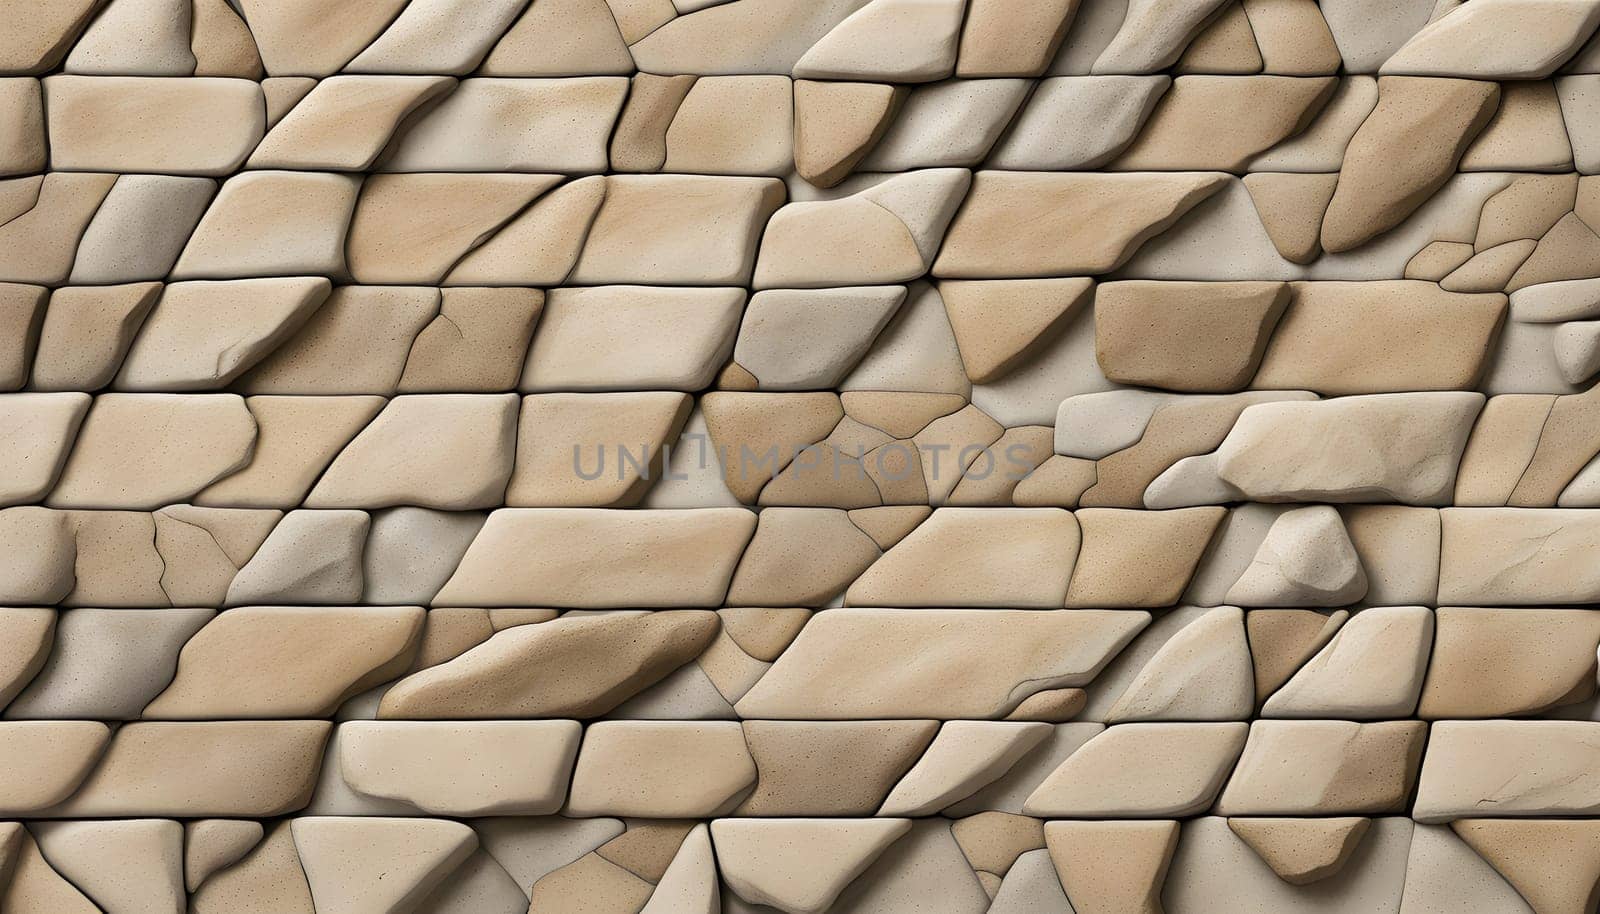 stone floor detail, concrete art, physically based rendering, intricate patterns of beige colored stones with joints by rostik924